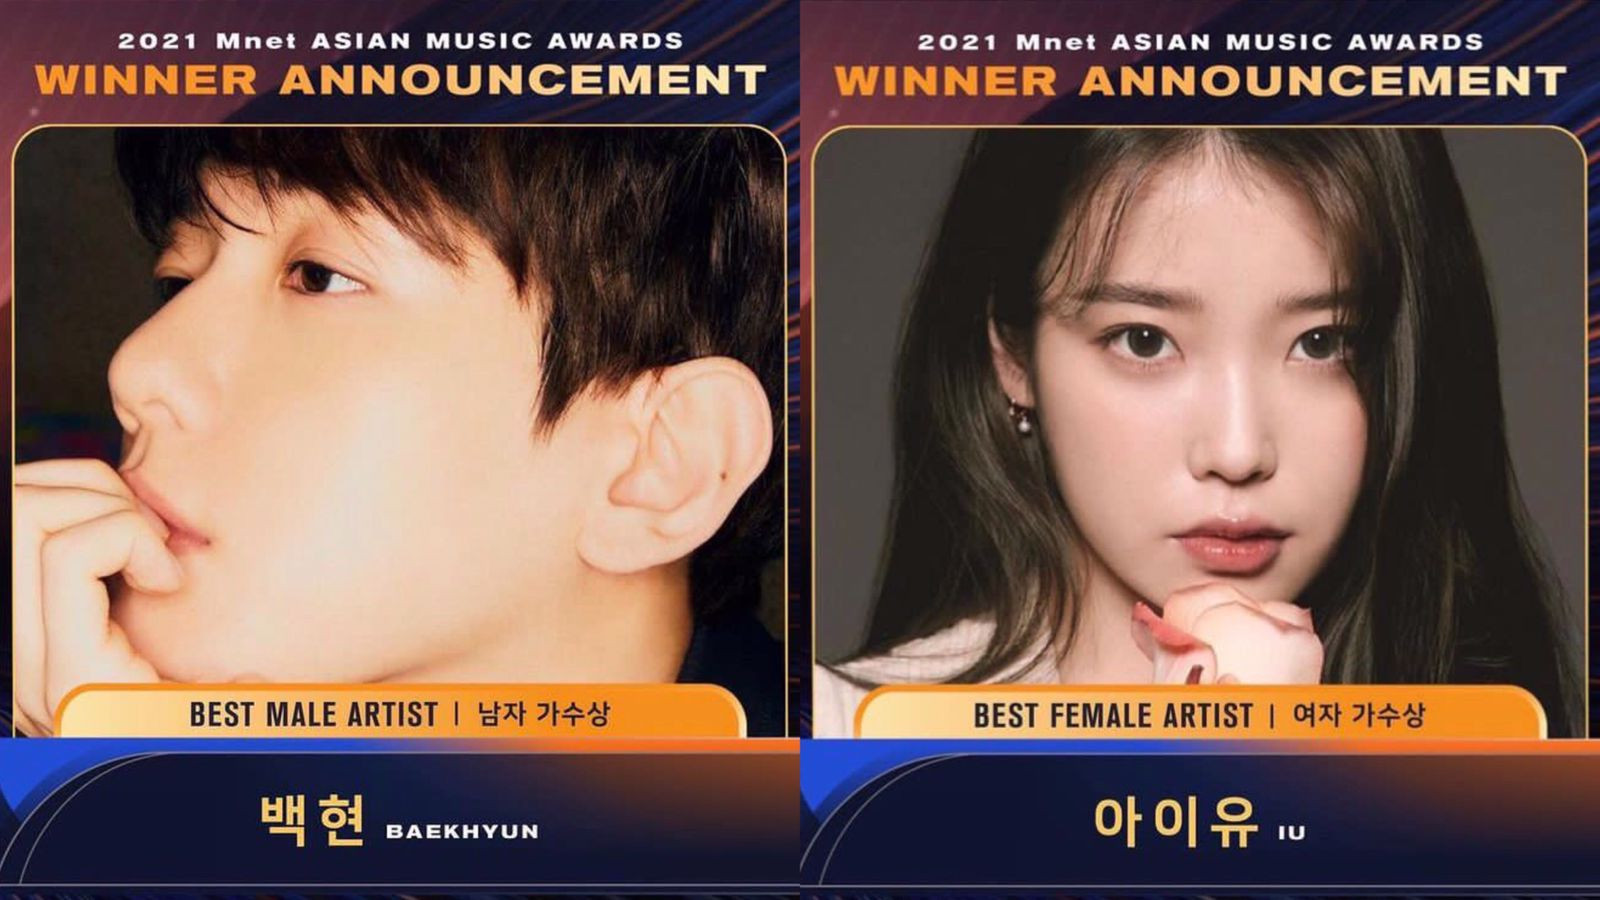 Best Male and Female Artist, (Instagram.com/mnet_mama)